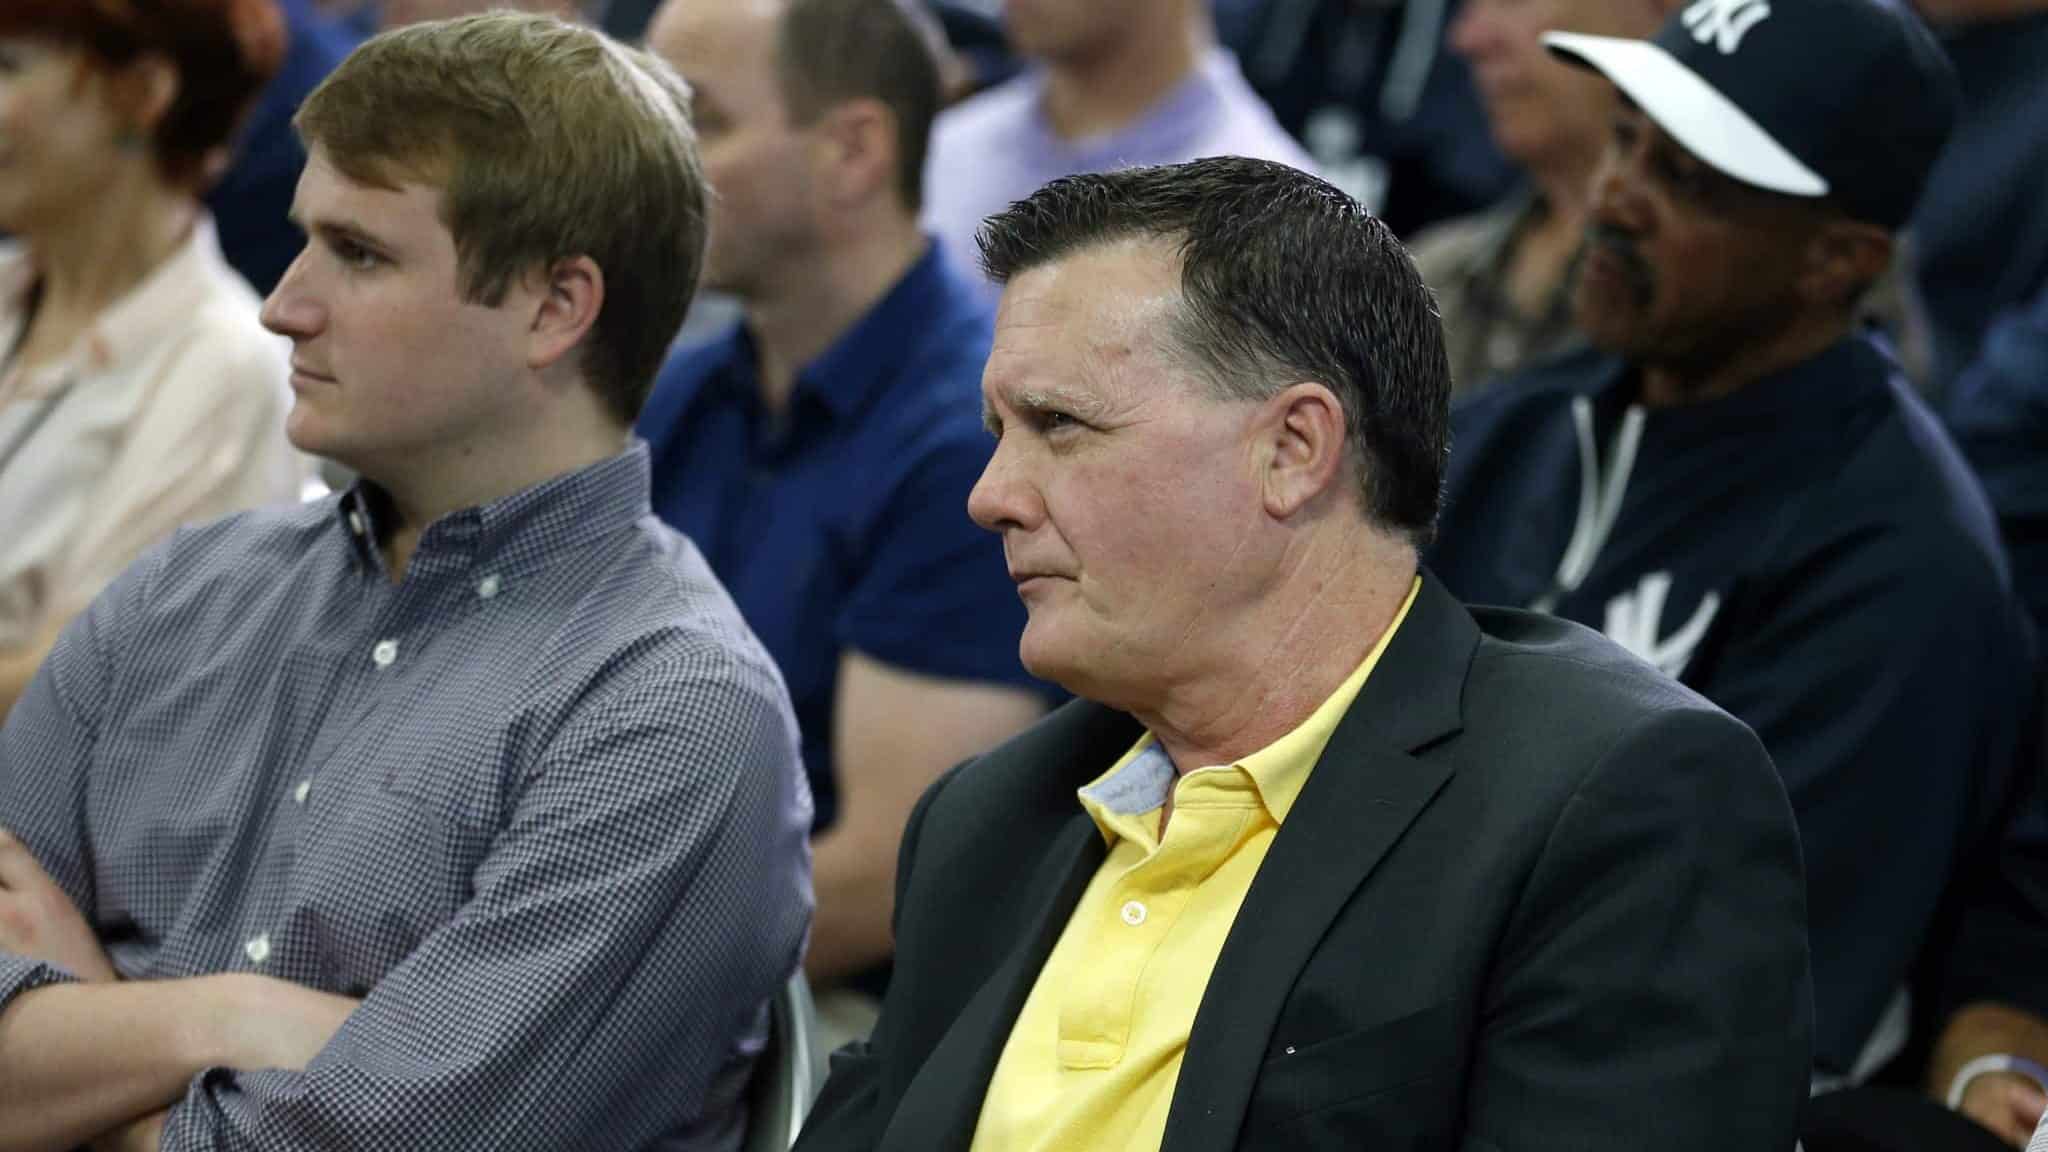 TAMPA, FL - FEBRUARY 19: Hank Steinbrenner, General Partner and Co-Chairperson of the New York Yankees watches as Derek Jeter speaks at a media availability after announcing that the 2014 season will be his last before retiring at George M. Steinbrenner Field on February 19, 2014 in Tampa, Florida.